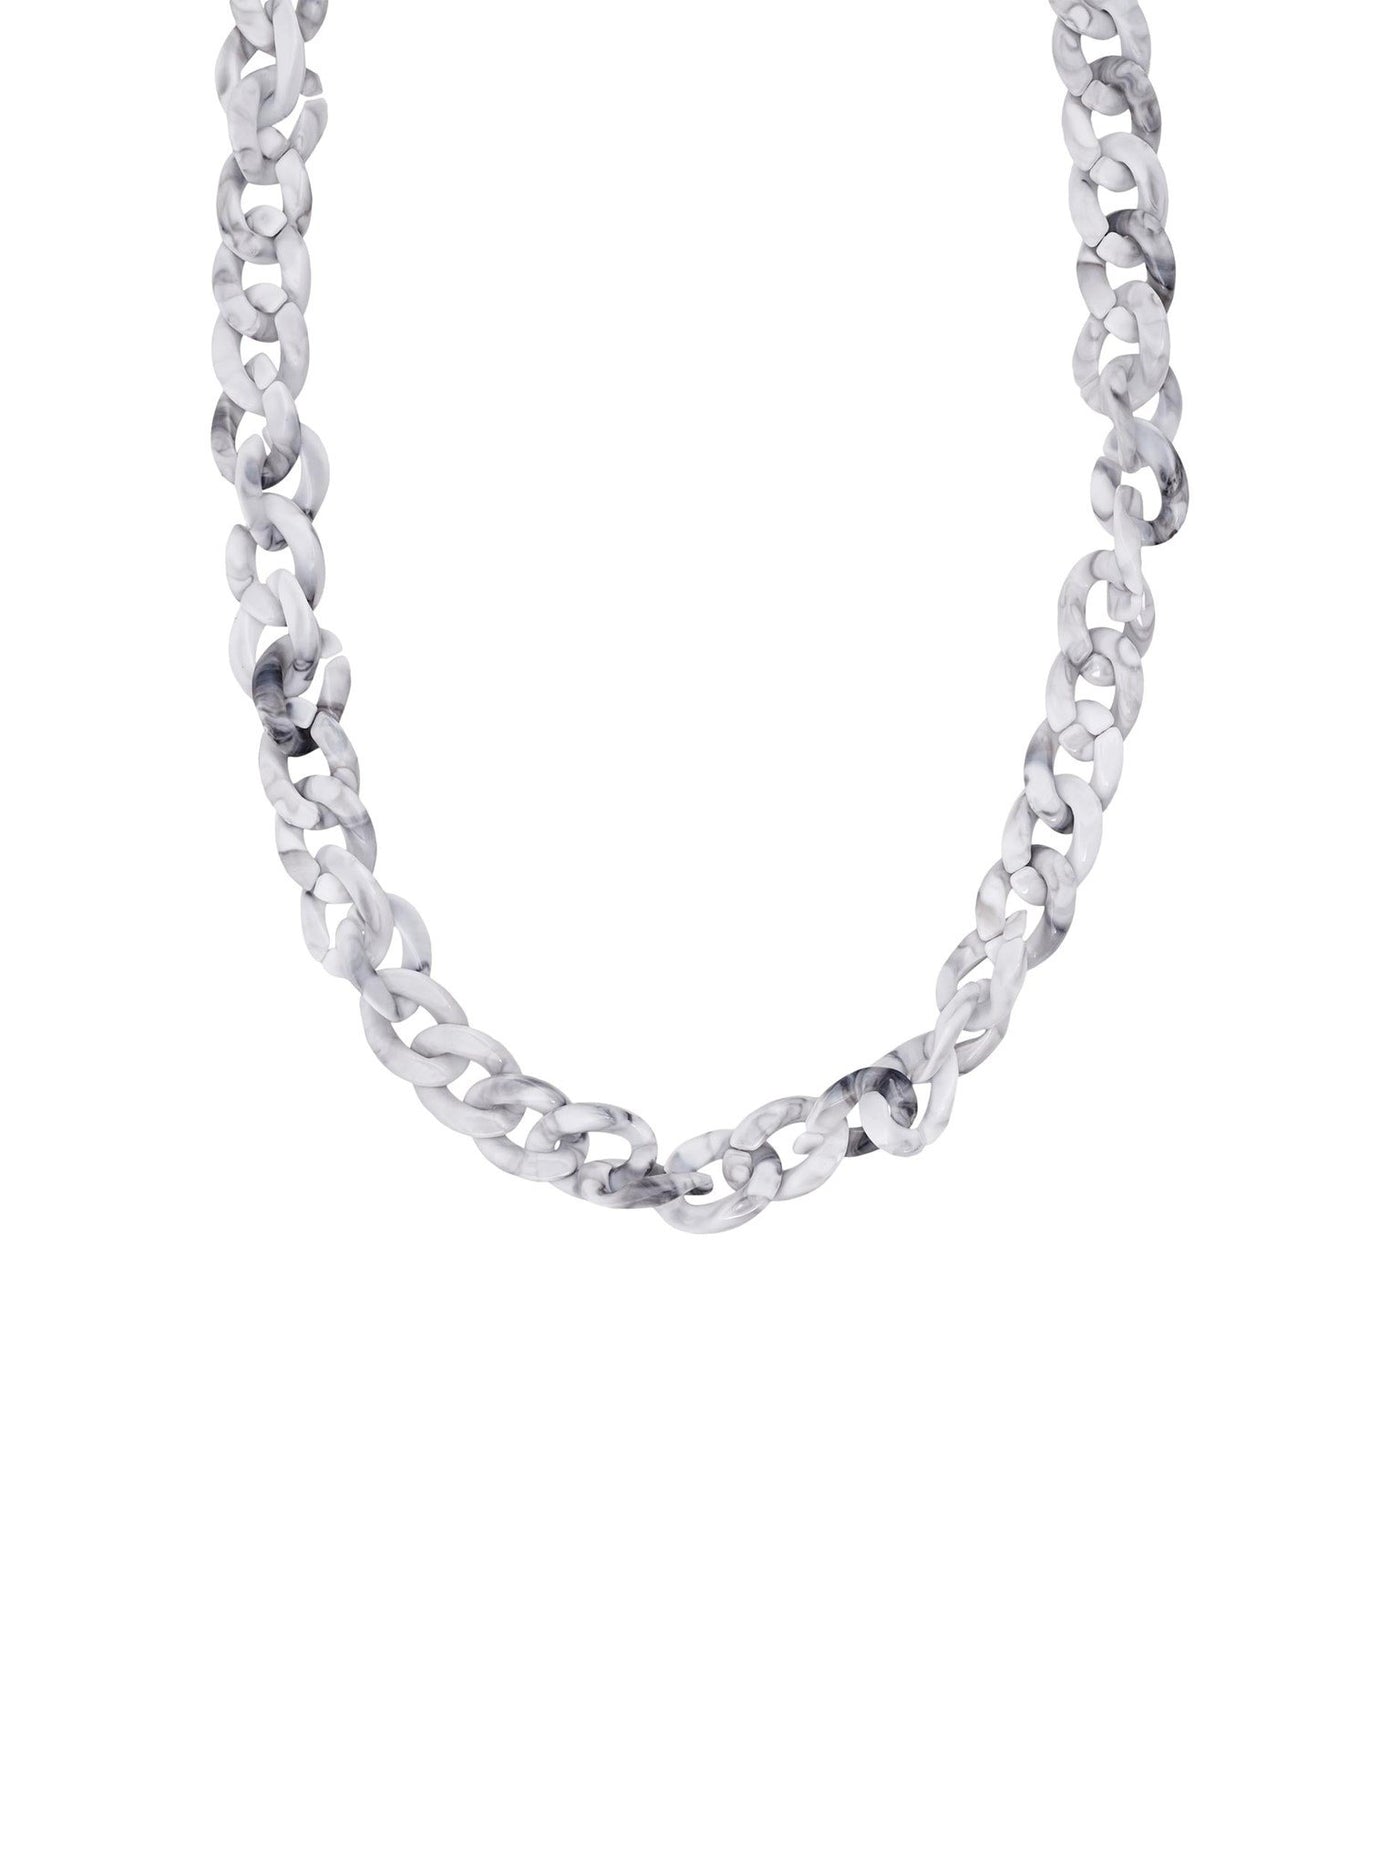 Franky Chain - Cloud Dancer - ONLY - Silver